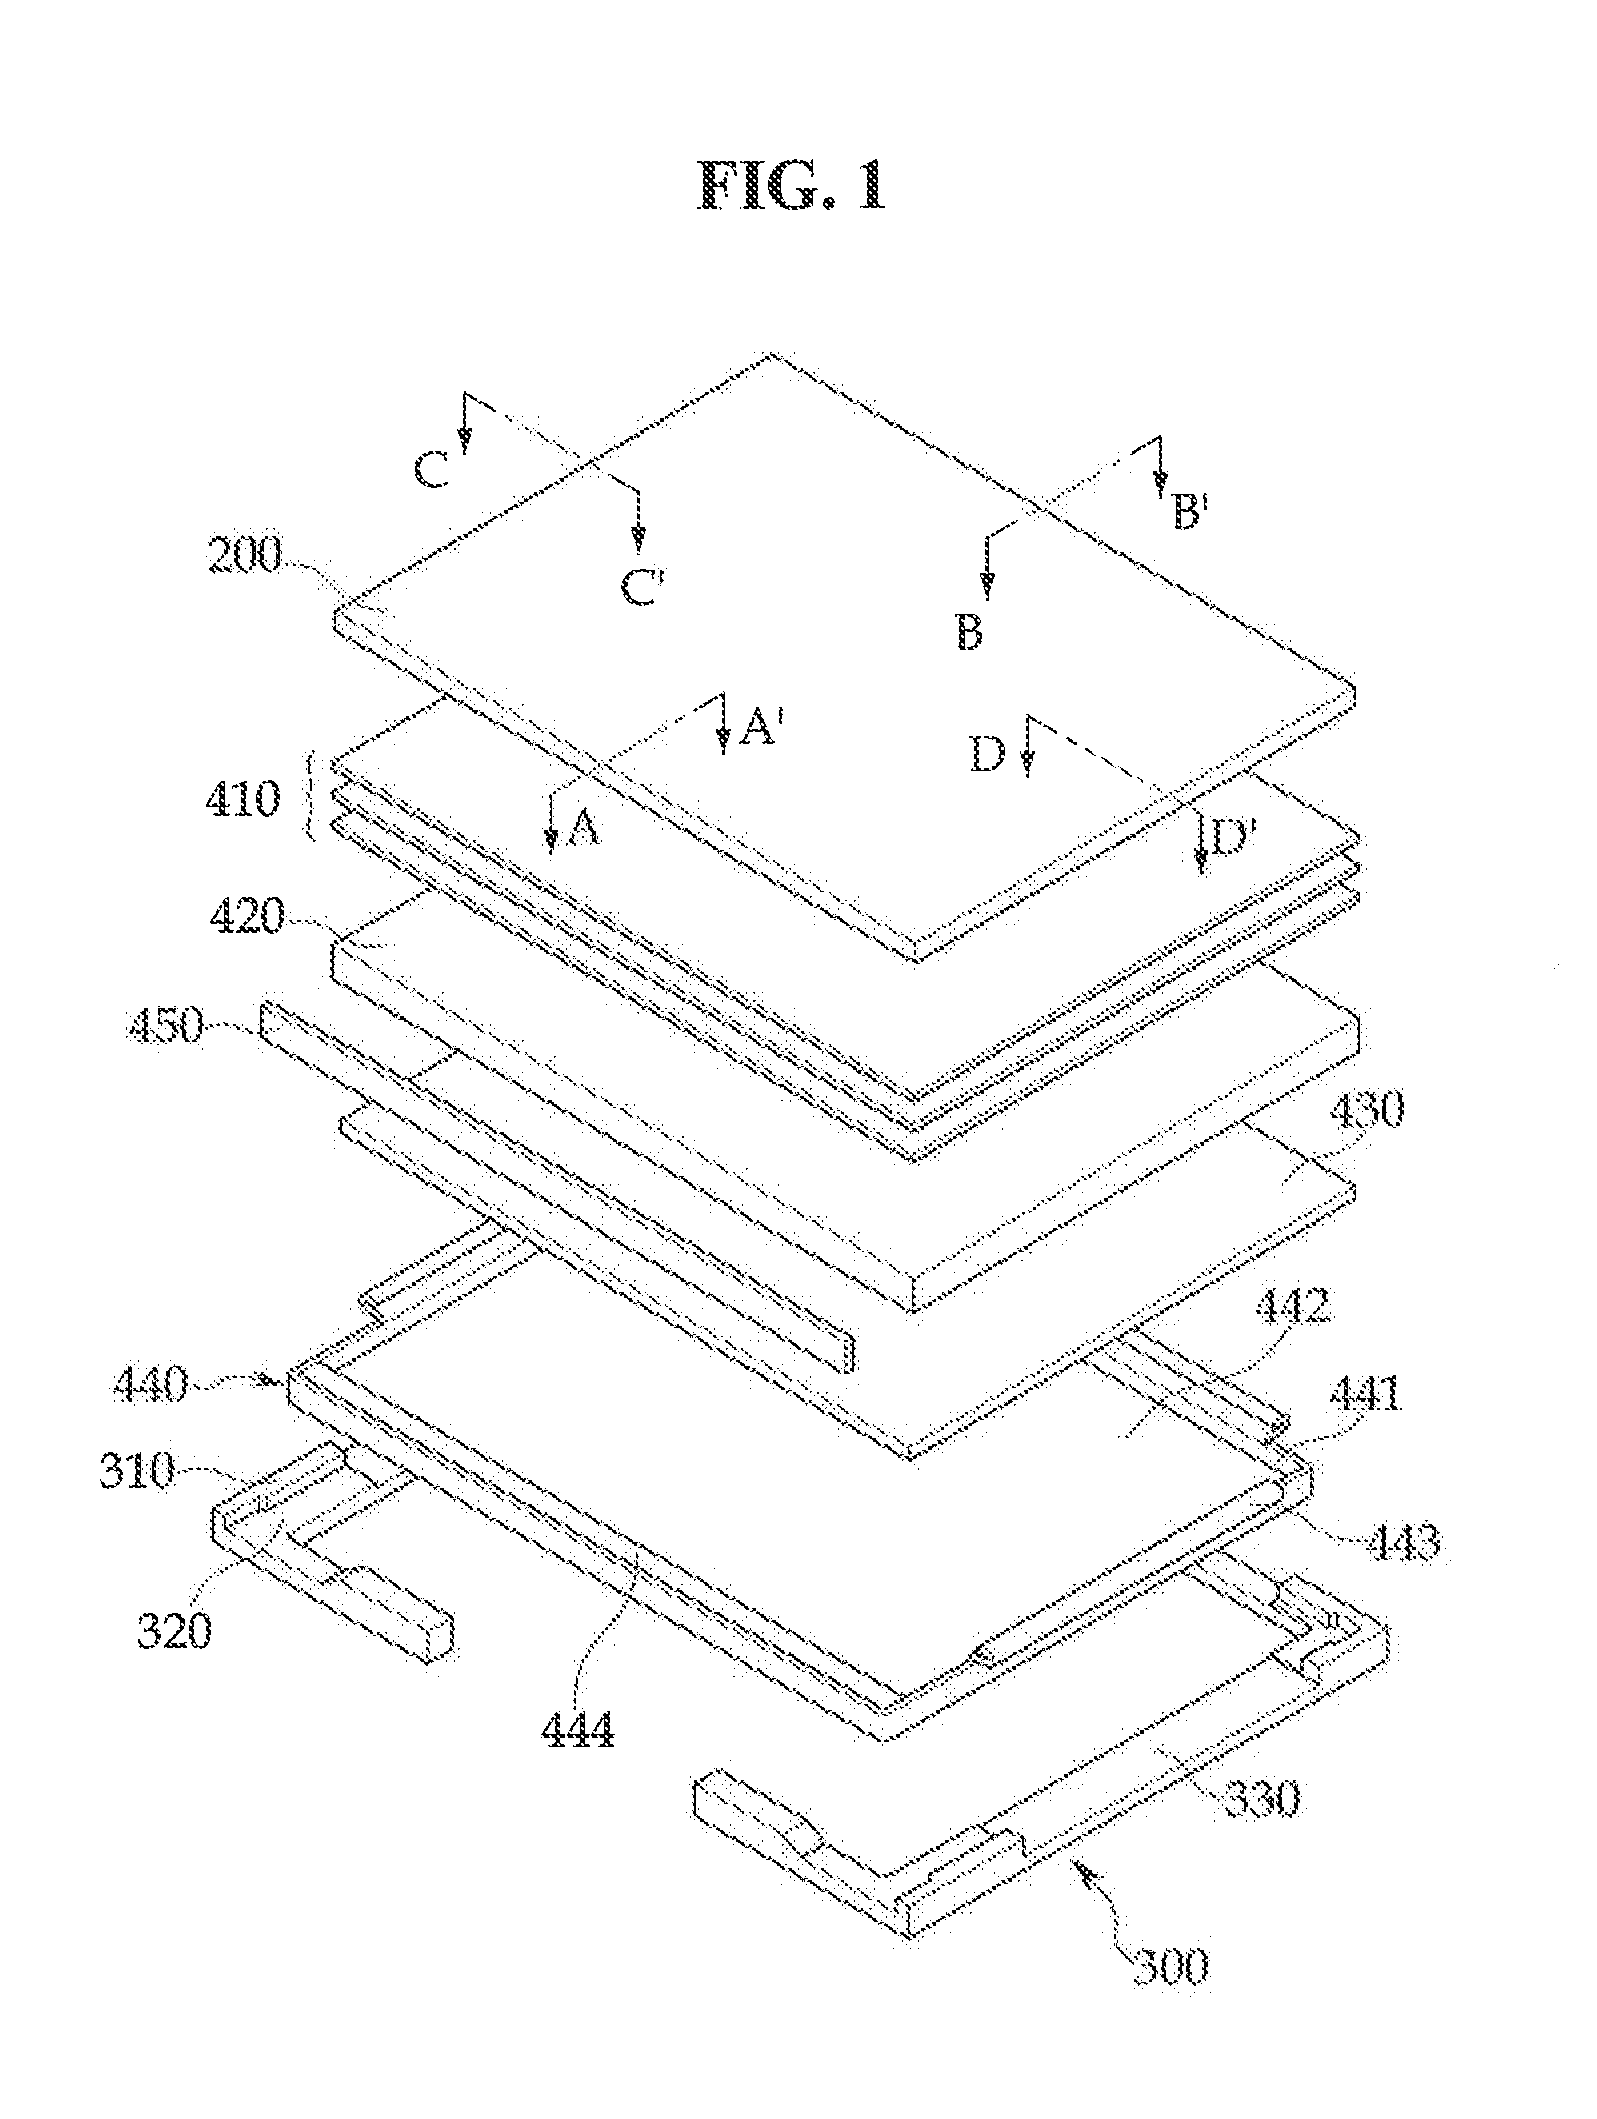 Display device having a bottom chassis including a binding portion